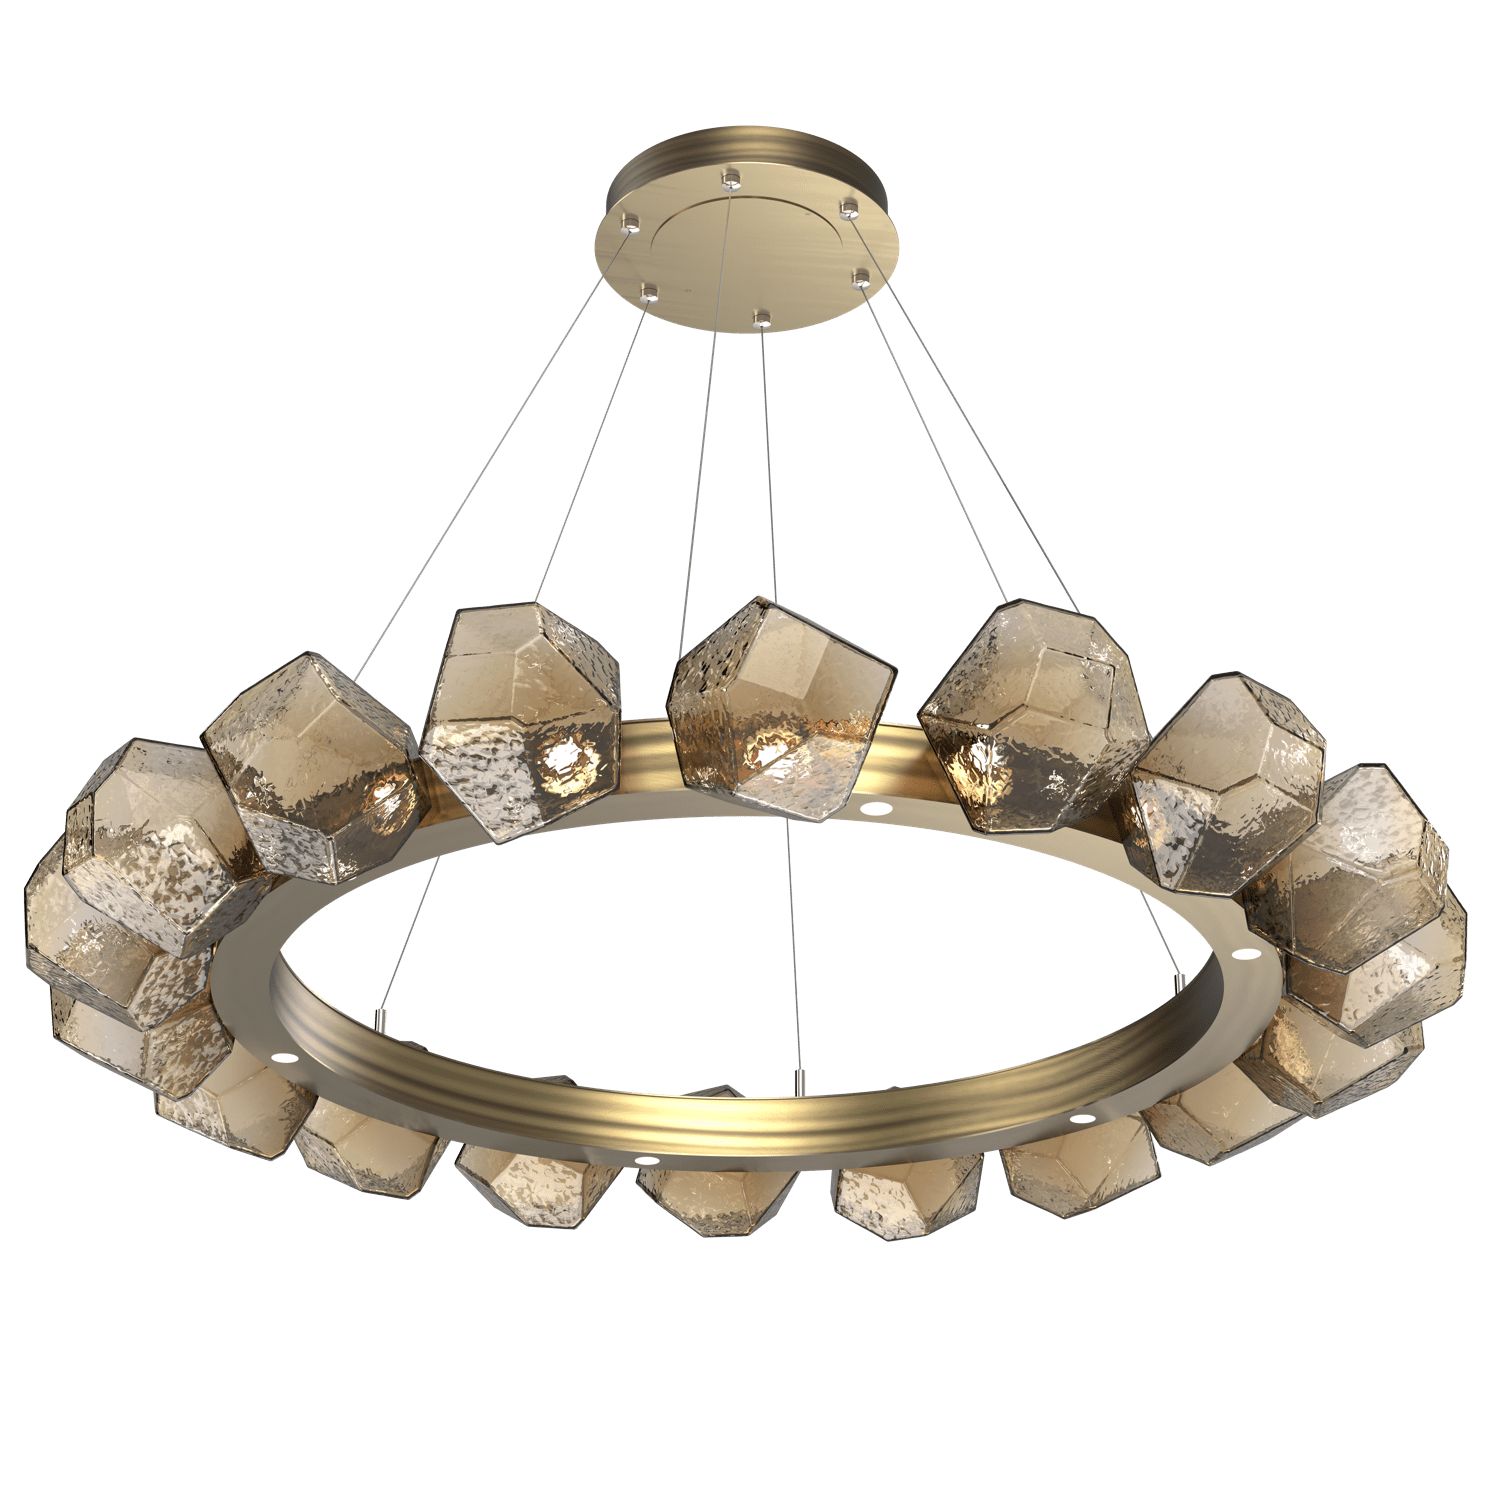 CHB0039-48-HB-B-Hammerton-Studio-Gem-48-inch-radial-ring-chandelier-with-heritage-brass-finish-and-bronze-blown-glass-shades-and-LED-lamping